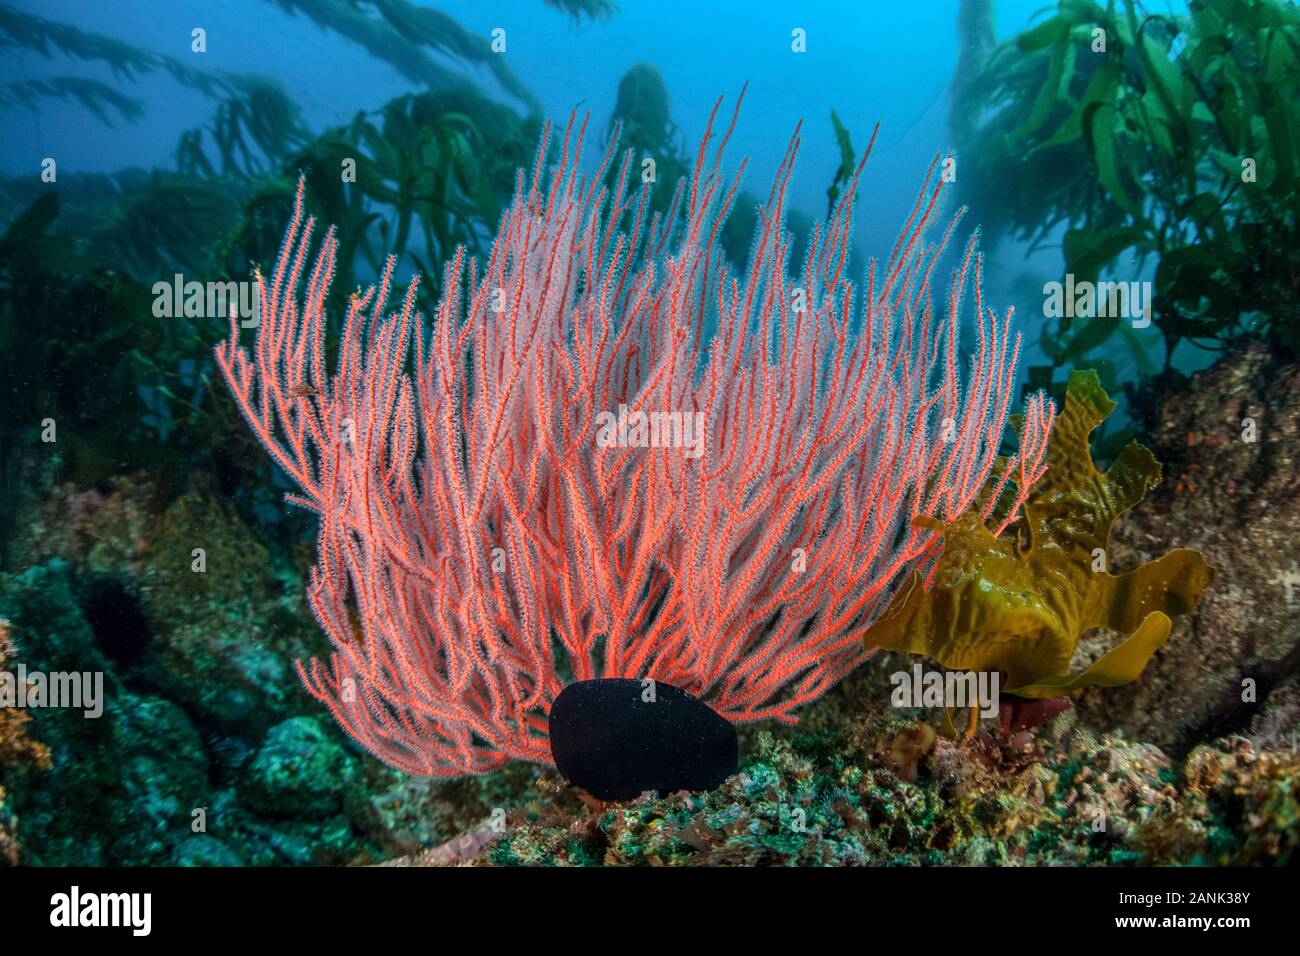 gorgonian and giant kelp, Macrocystis pyrifera, cling to the rocky bottom of a reef off the Santa Barbara Island, Channel Islands National Park, Calif Stock Photo